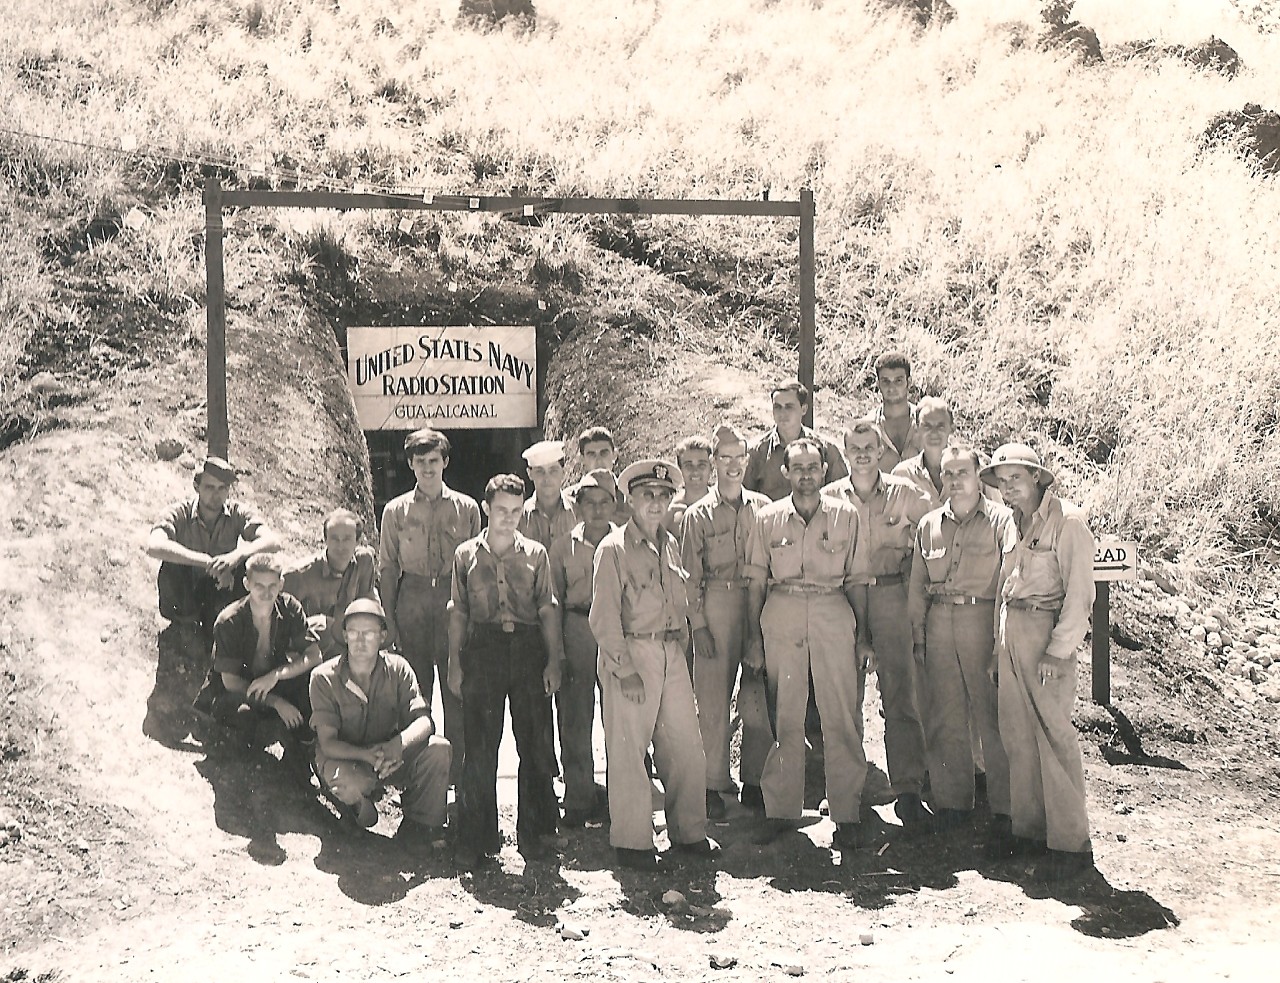 US Navy Radio Station Guadalcanal built and run by the 6th Naval Construction Battalion, 7 December 1942.